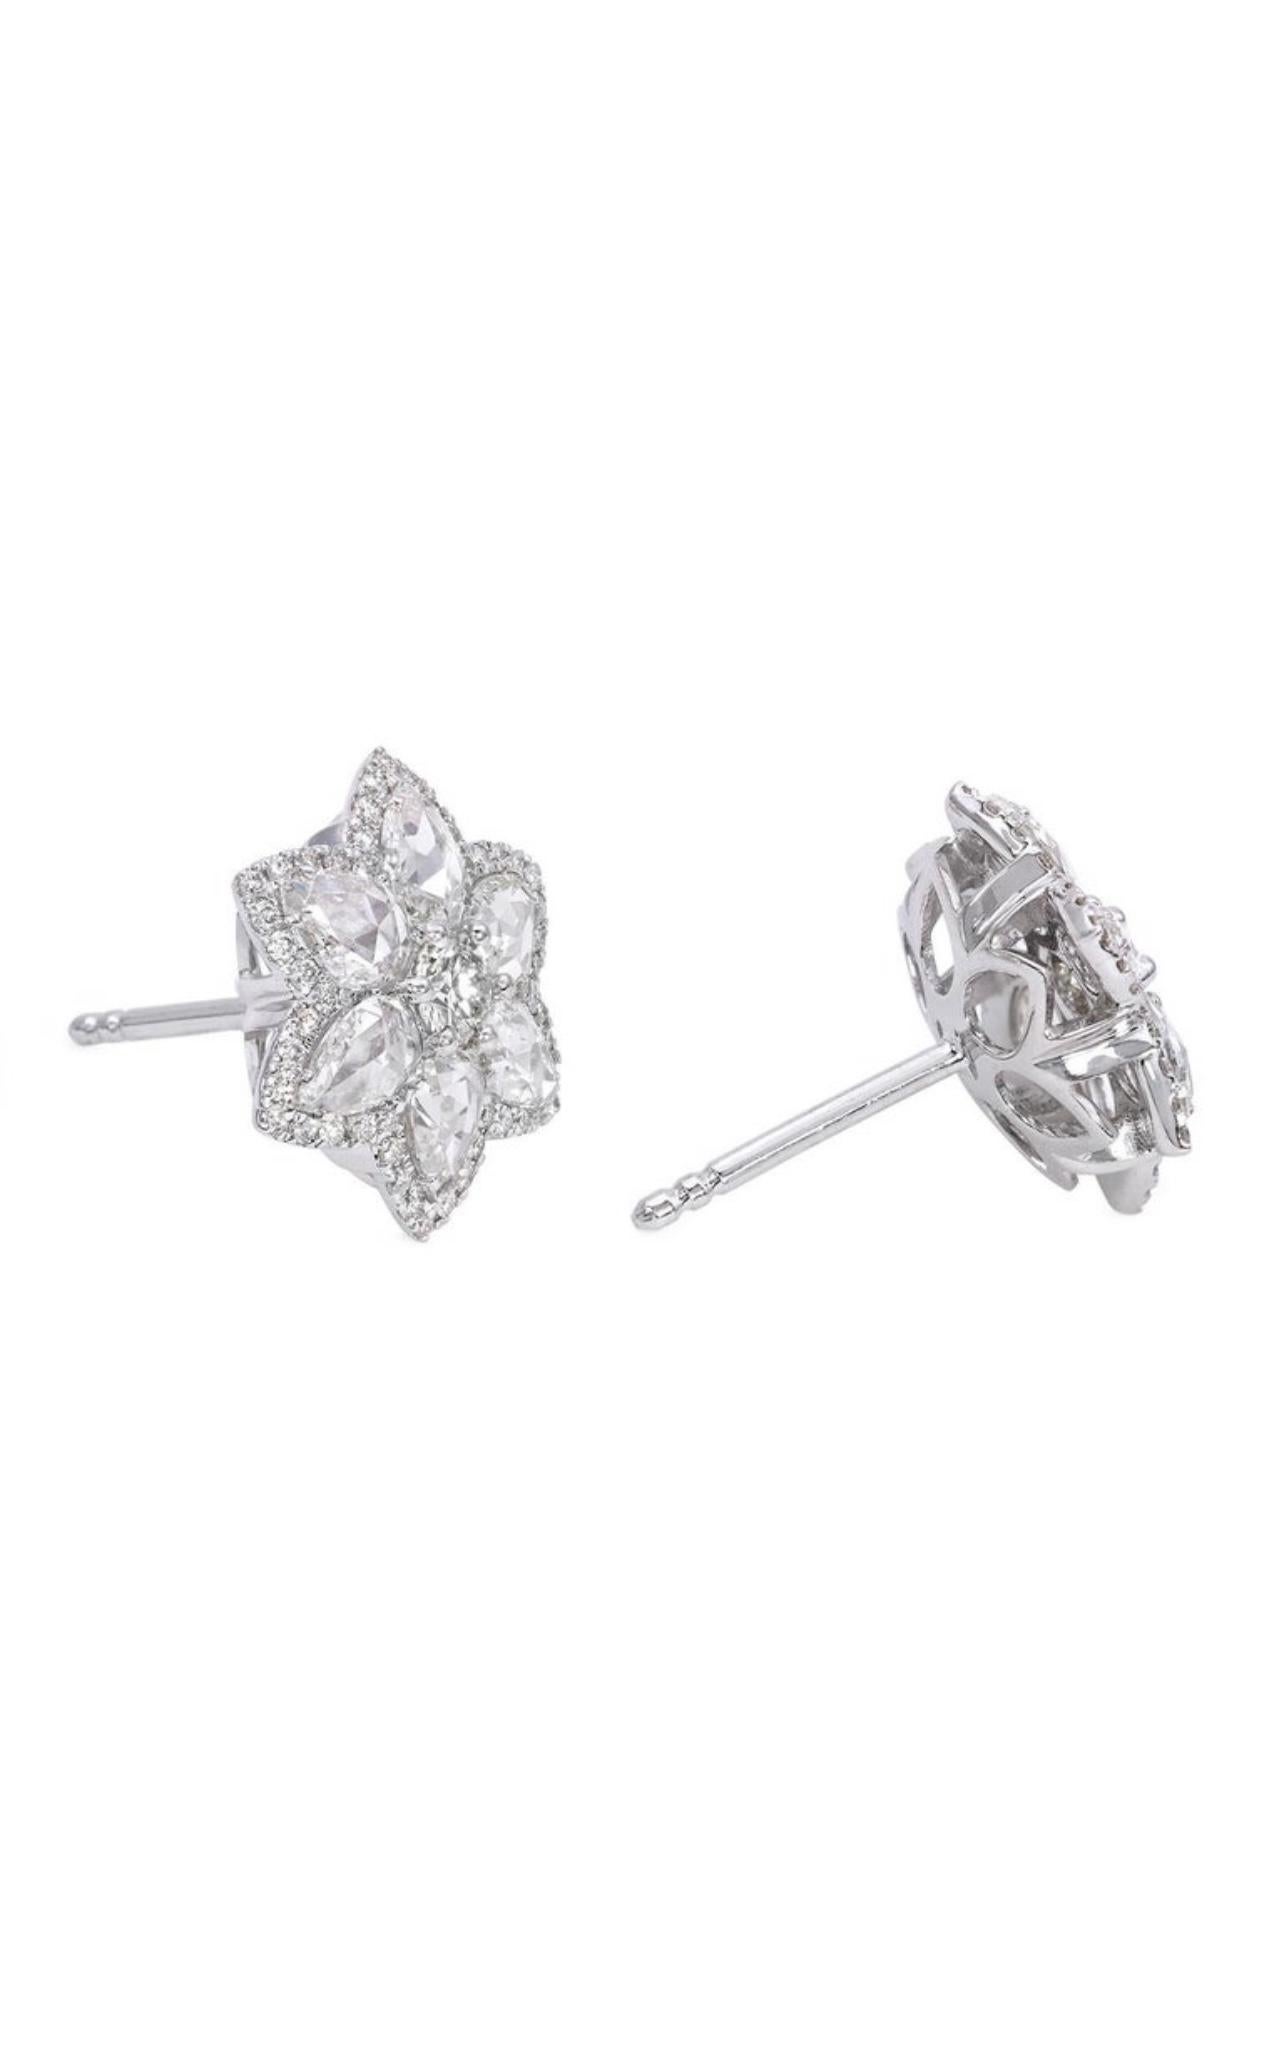 Refreshingly Unique Rose Cut And Round brilliant cut diamond star stud earrings handcrafted in 18k white gold . 
The details are as follows : 
Diamond weight : round brilliant center : 0.84/2 carats ( HI color and VS clarity ) 
Rose cut diamond